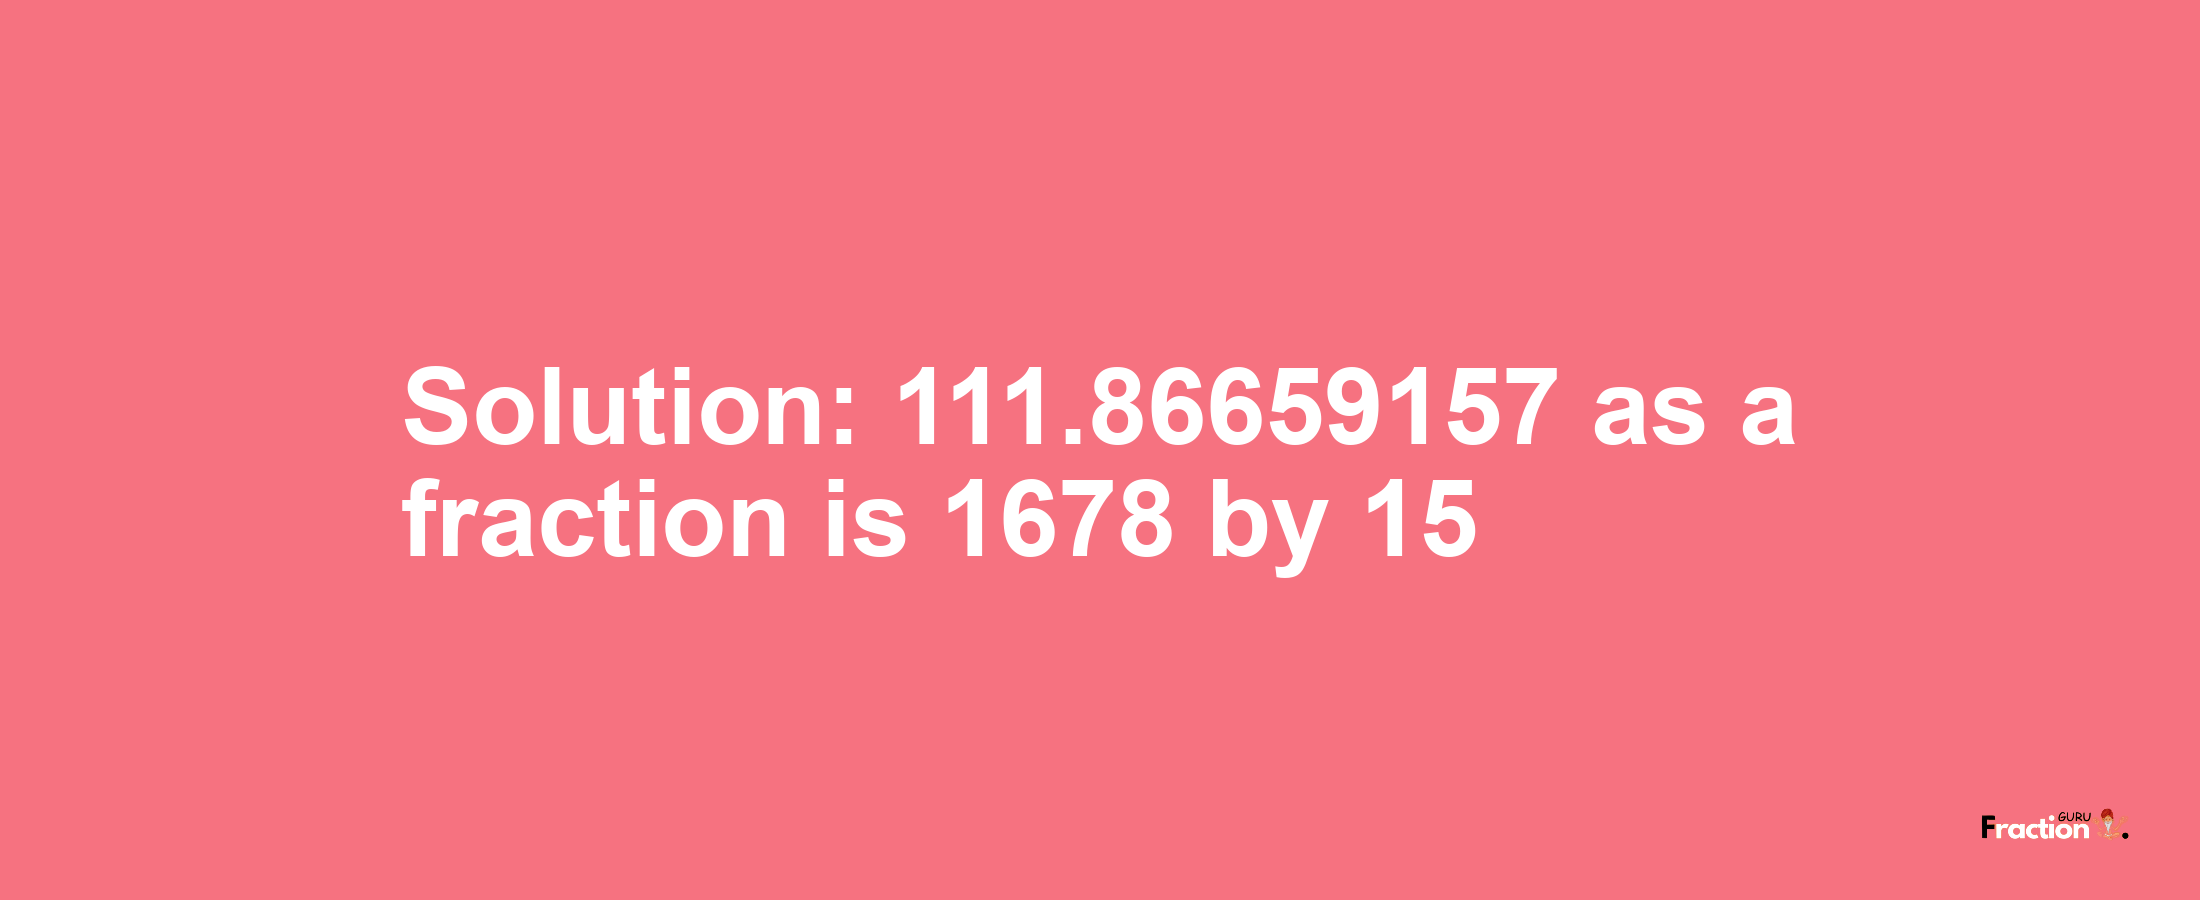 Solution:111.86659157 as a fraction is 1678/15